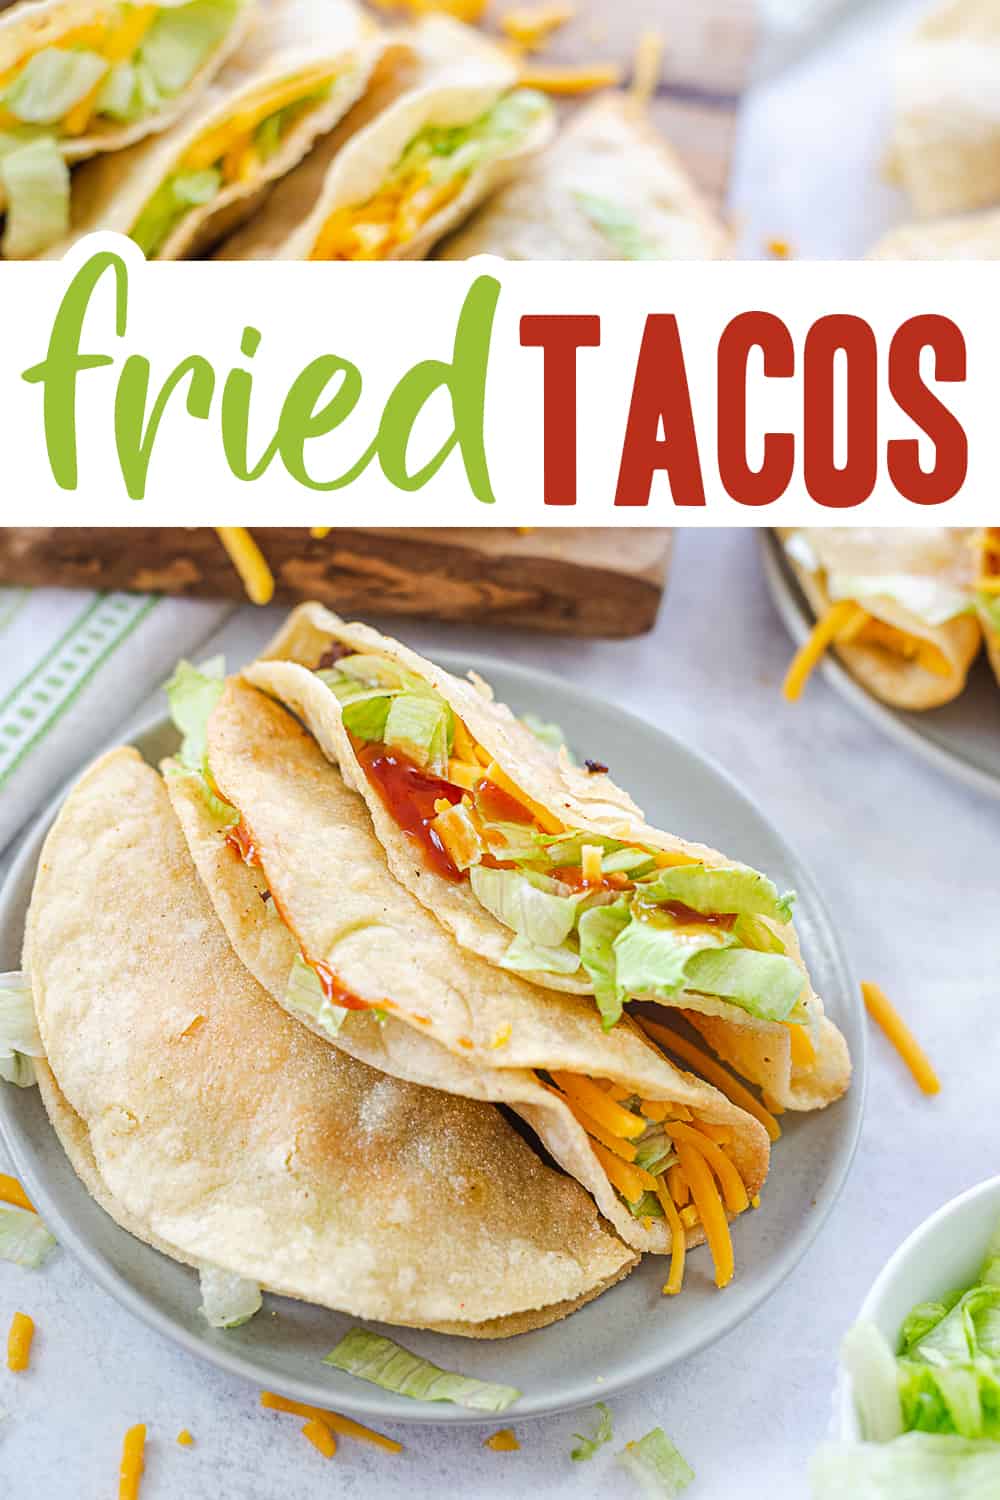 fried tacos on plate with text for Pinterest.